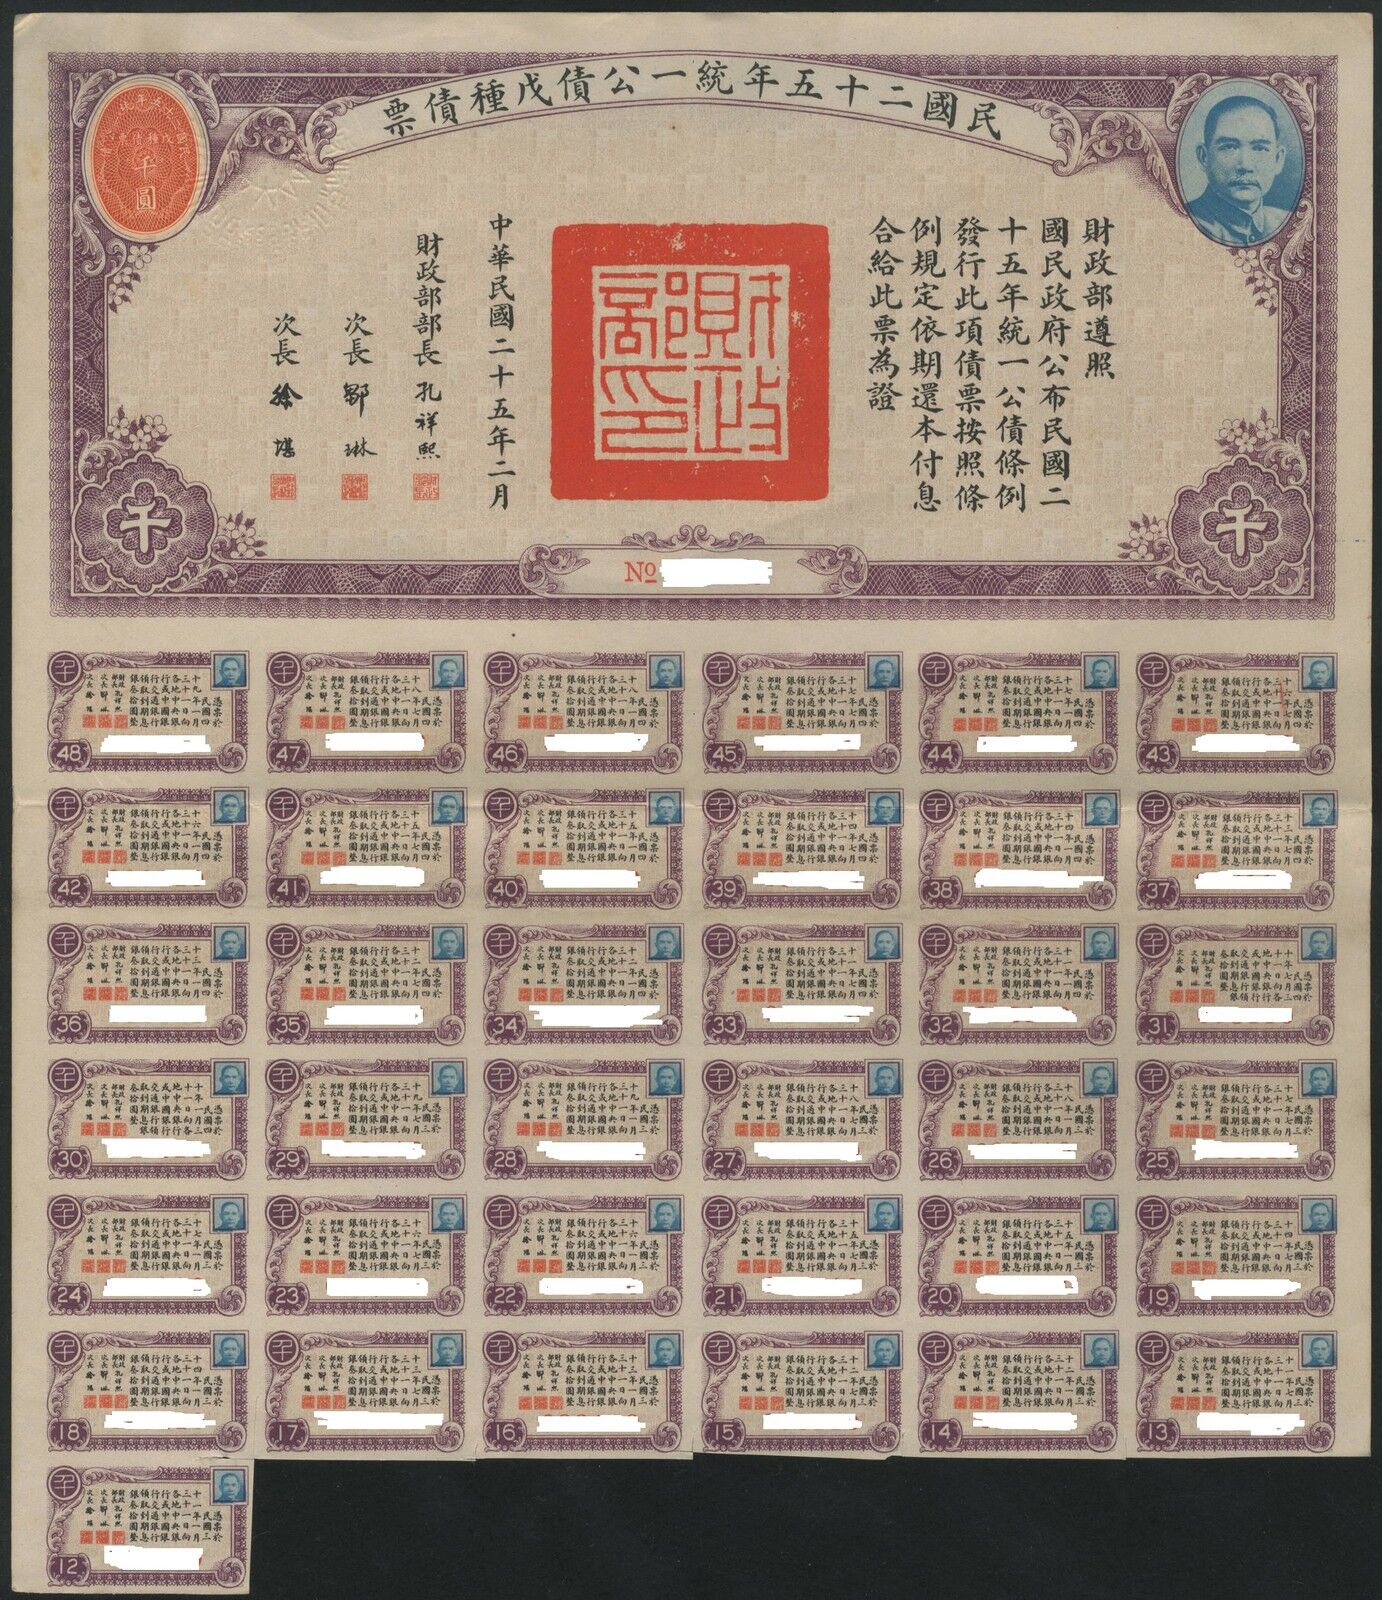  China 1936 Unification Bond Type E $1000 Uncancelled with coupons  